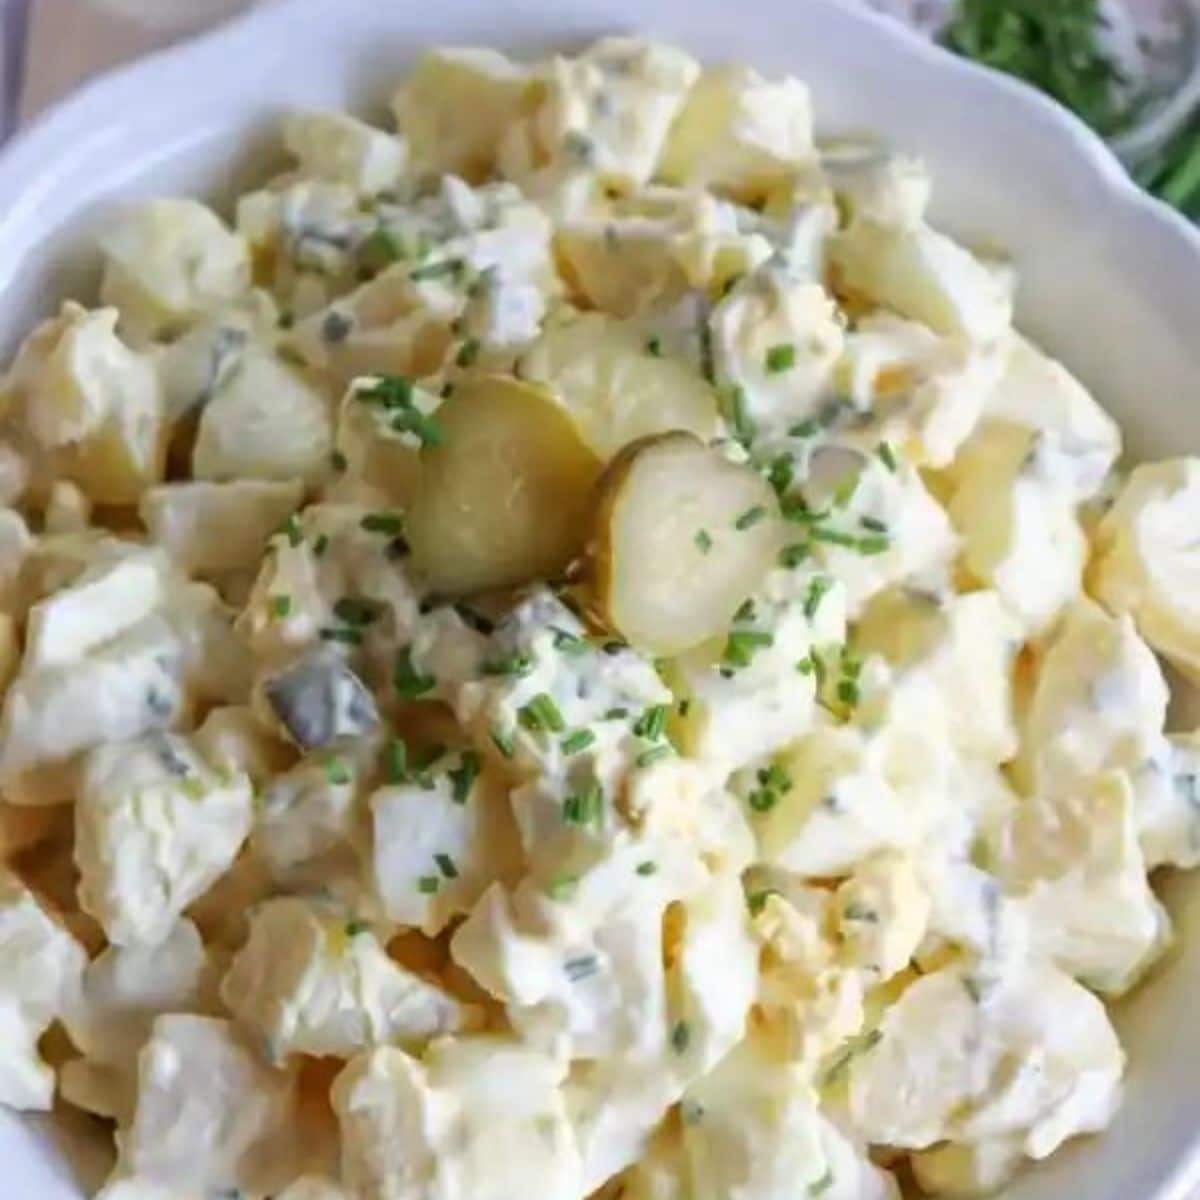 Easy Potato salad with dill pickles.